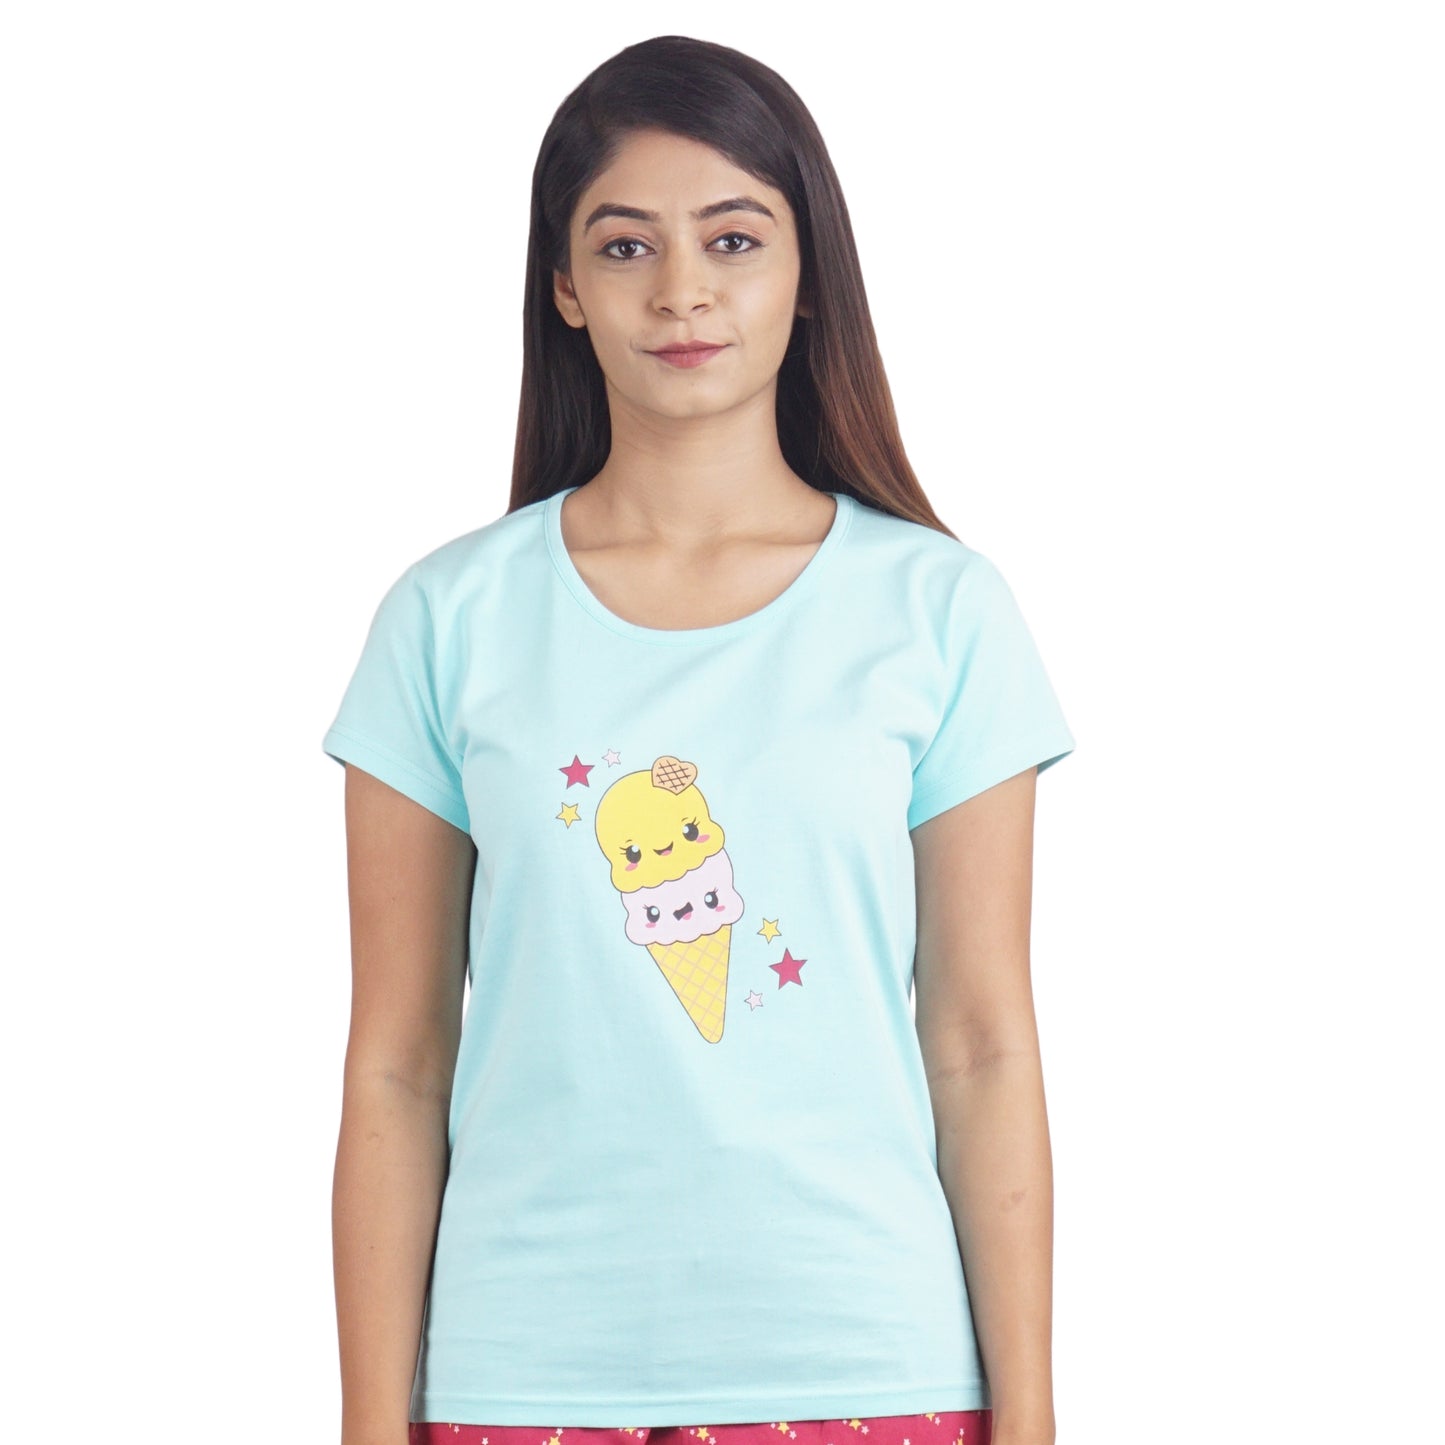 light blue t shirt with round neck and short sleeve, it has ice cream cone print in yellow and light pink color